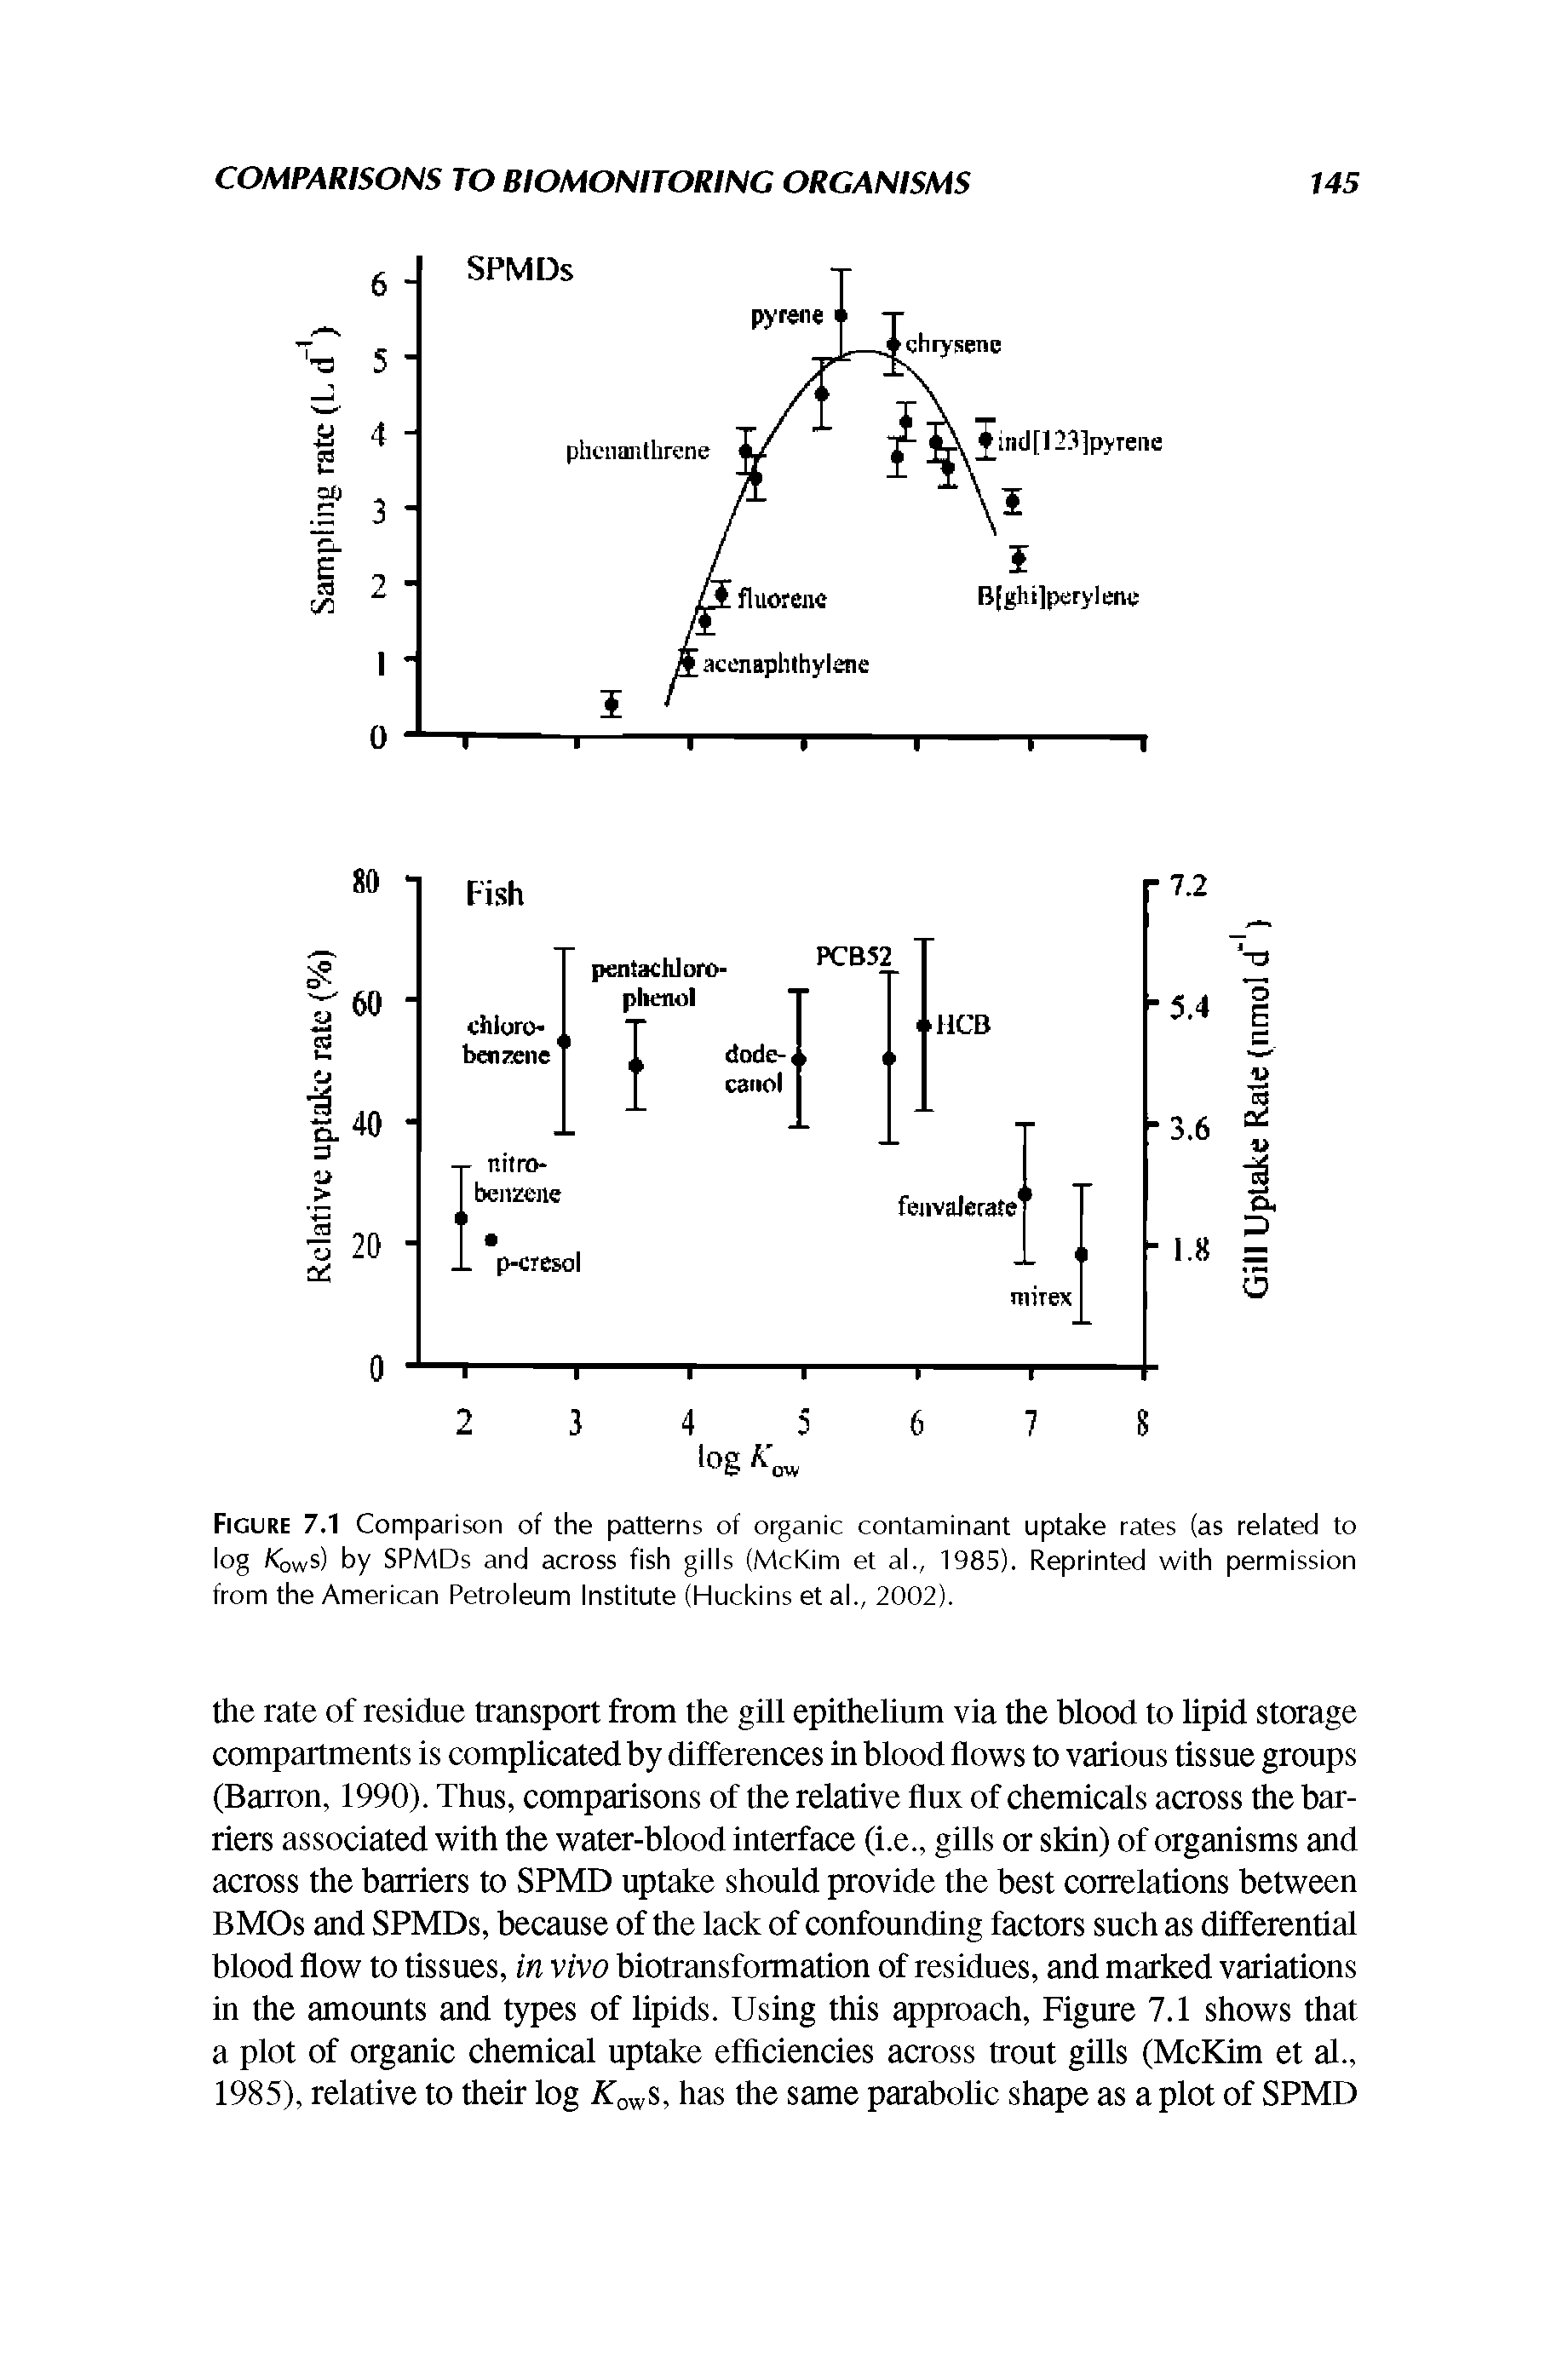 Figure 7.1 Comparison of the patterns of organic contaminant uptake rates (as related to log Kows) by SPMDs and across fish gills (McKim et ah, 1985). Reprinted with permission from the American Petroleum Institute (Huckins et al., 2002).